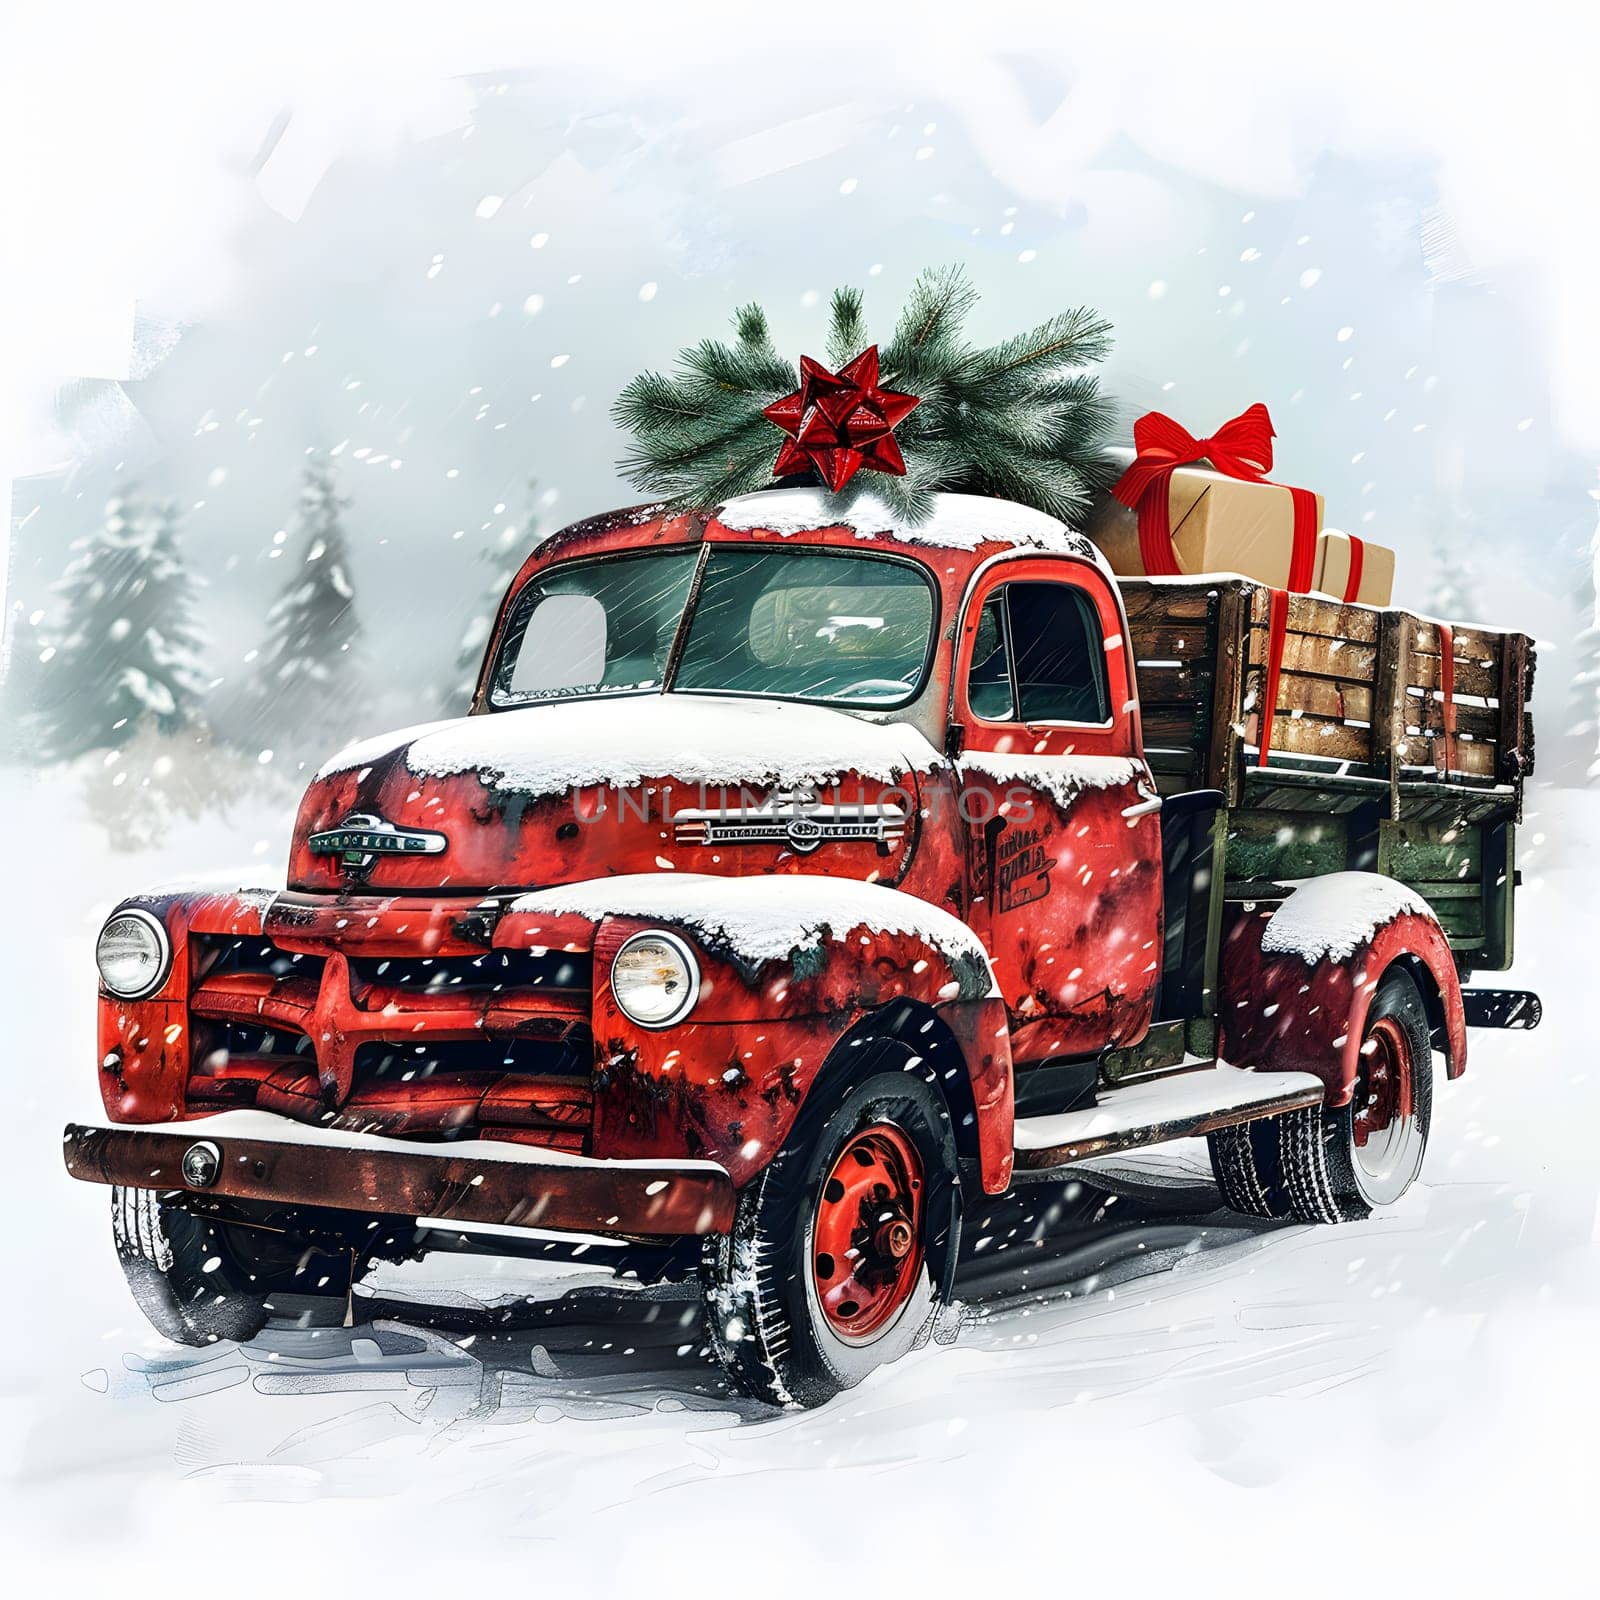 Red truck with Christmas tree and gifts driving in the snowy weather by Nadtochiy